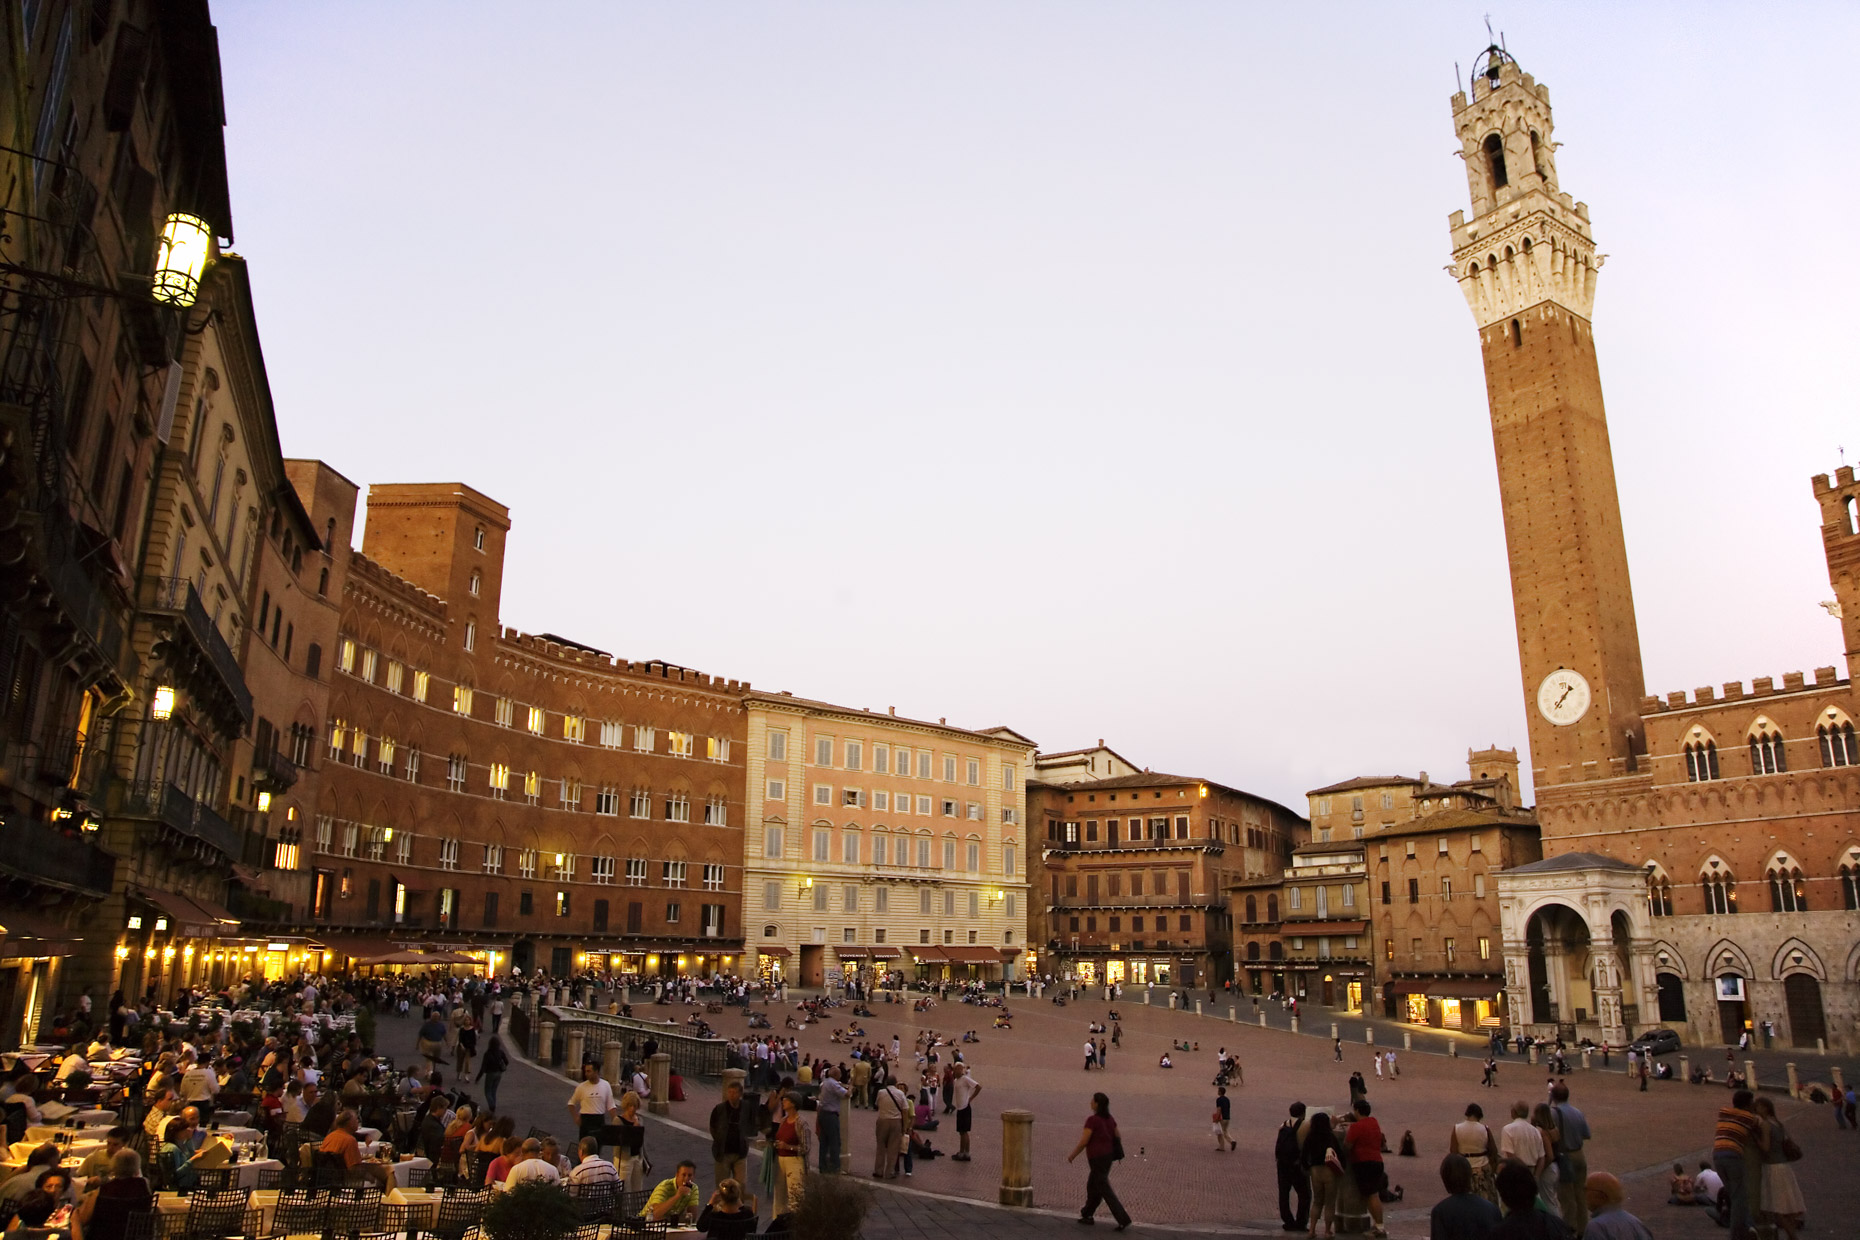 Piazza del Campo in Siena Italy at sunset